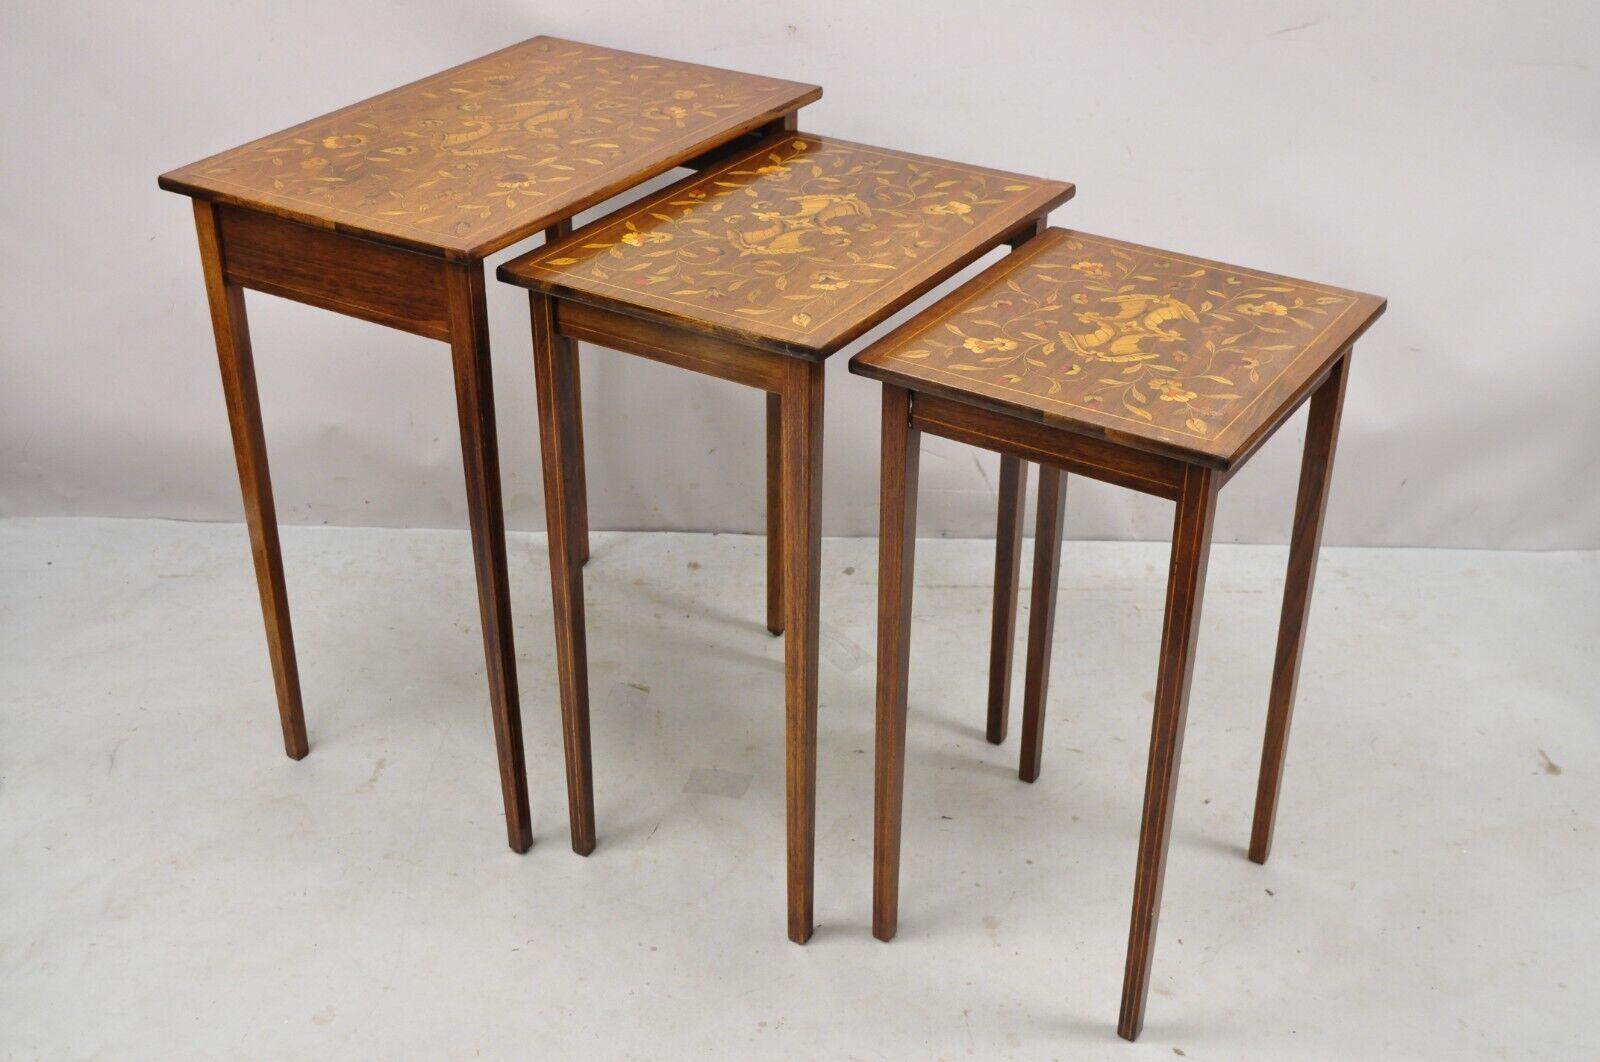 Antique Dutch Marquetry Inlay Mahogany Nesting Side Tables, 3 Pc Set For Sale 5